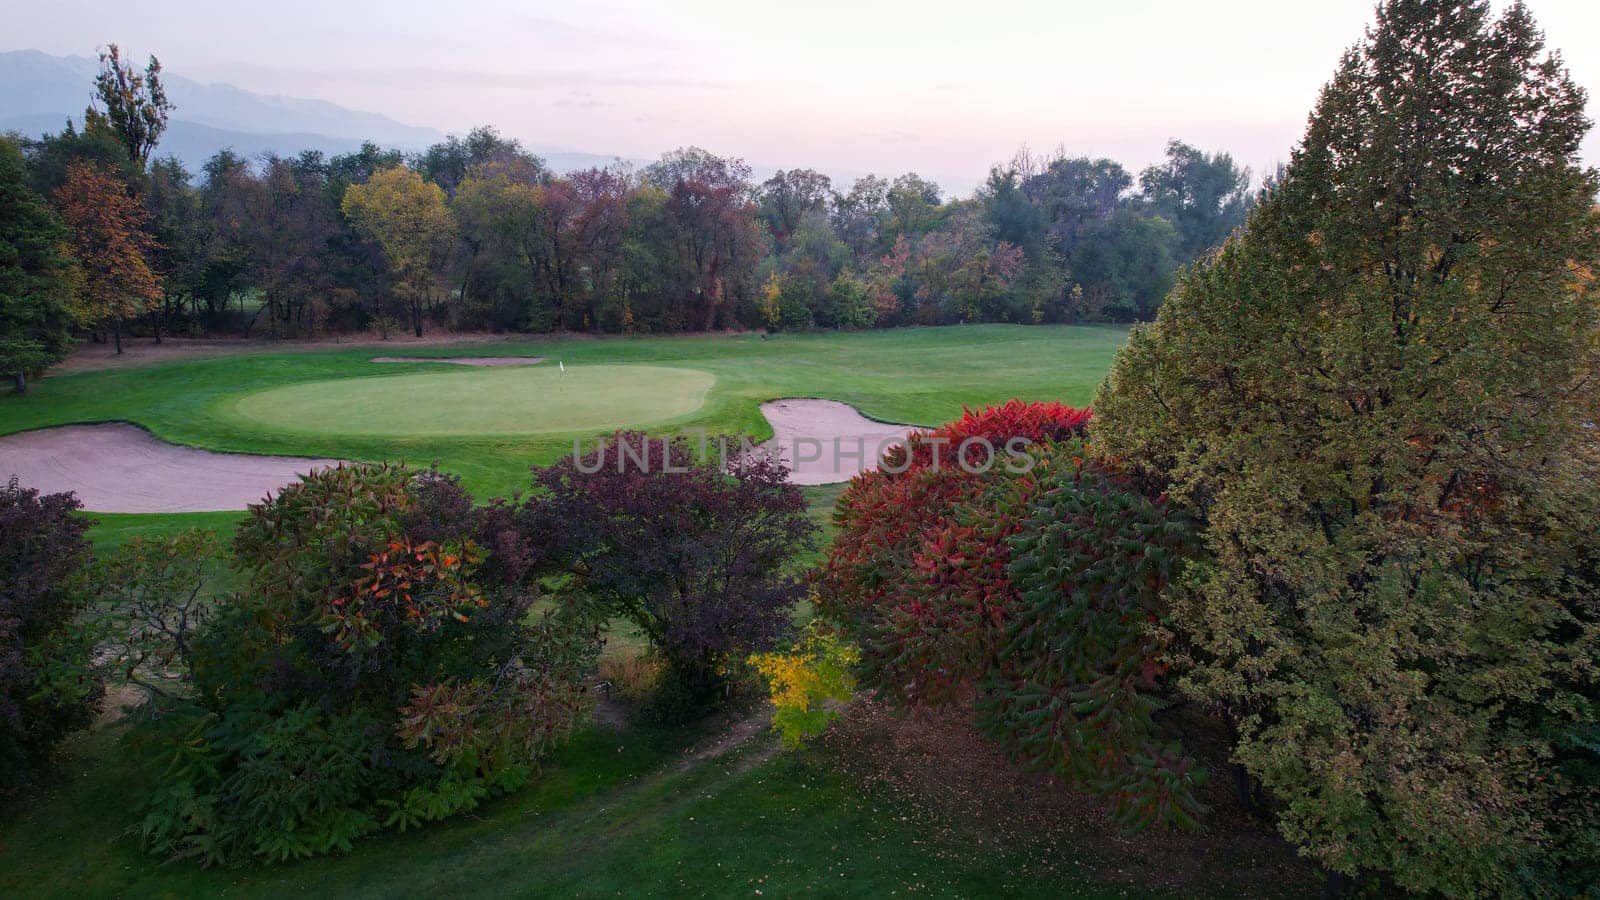 People play golf on a green field in autumn by Passcal